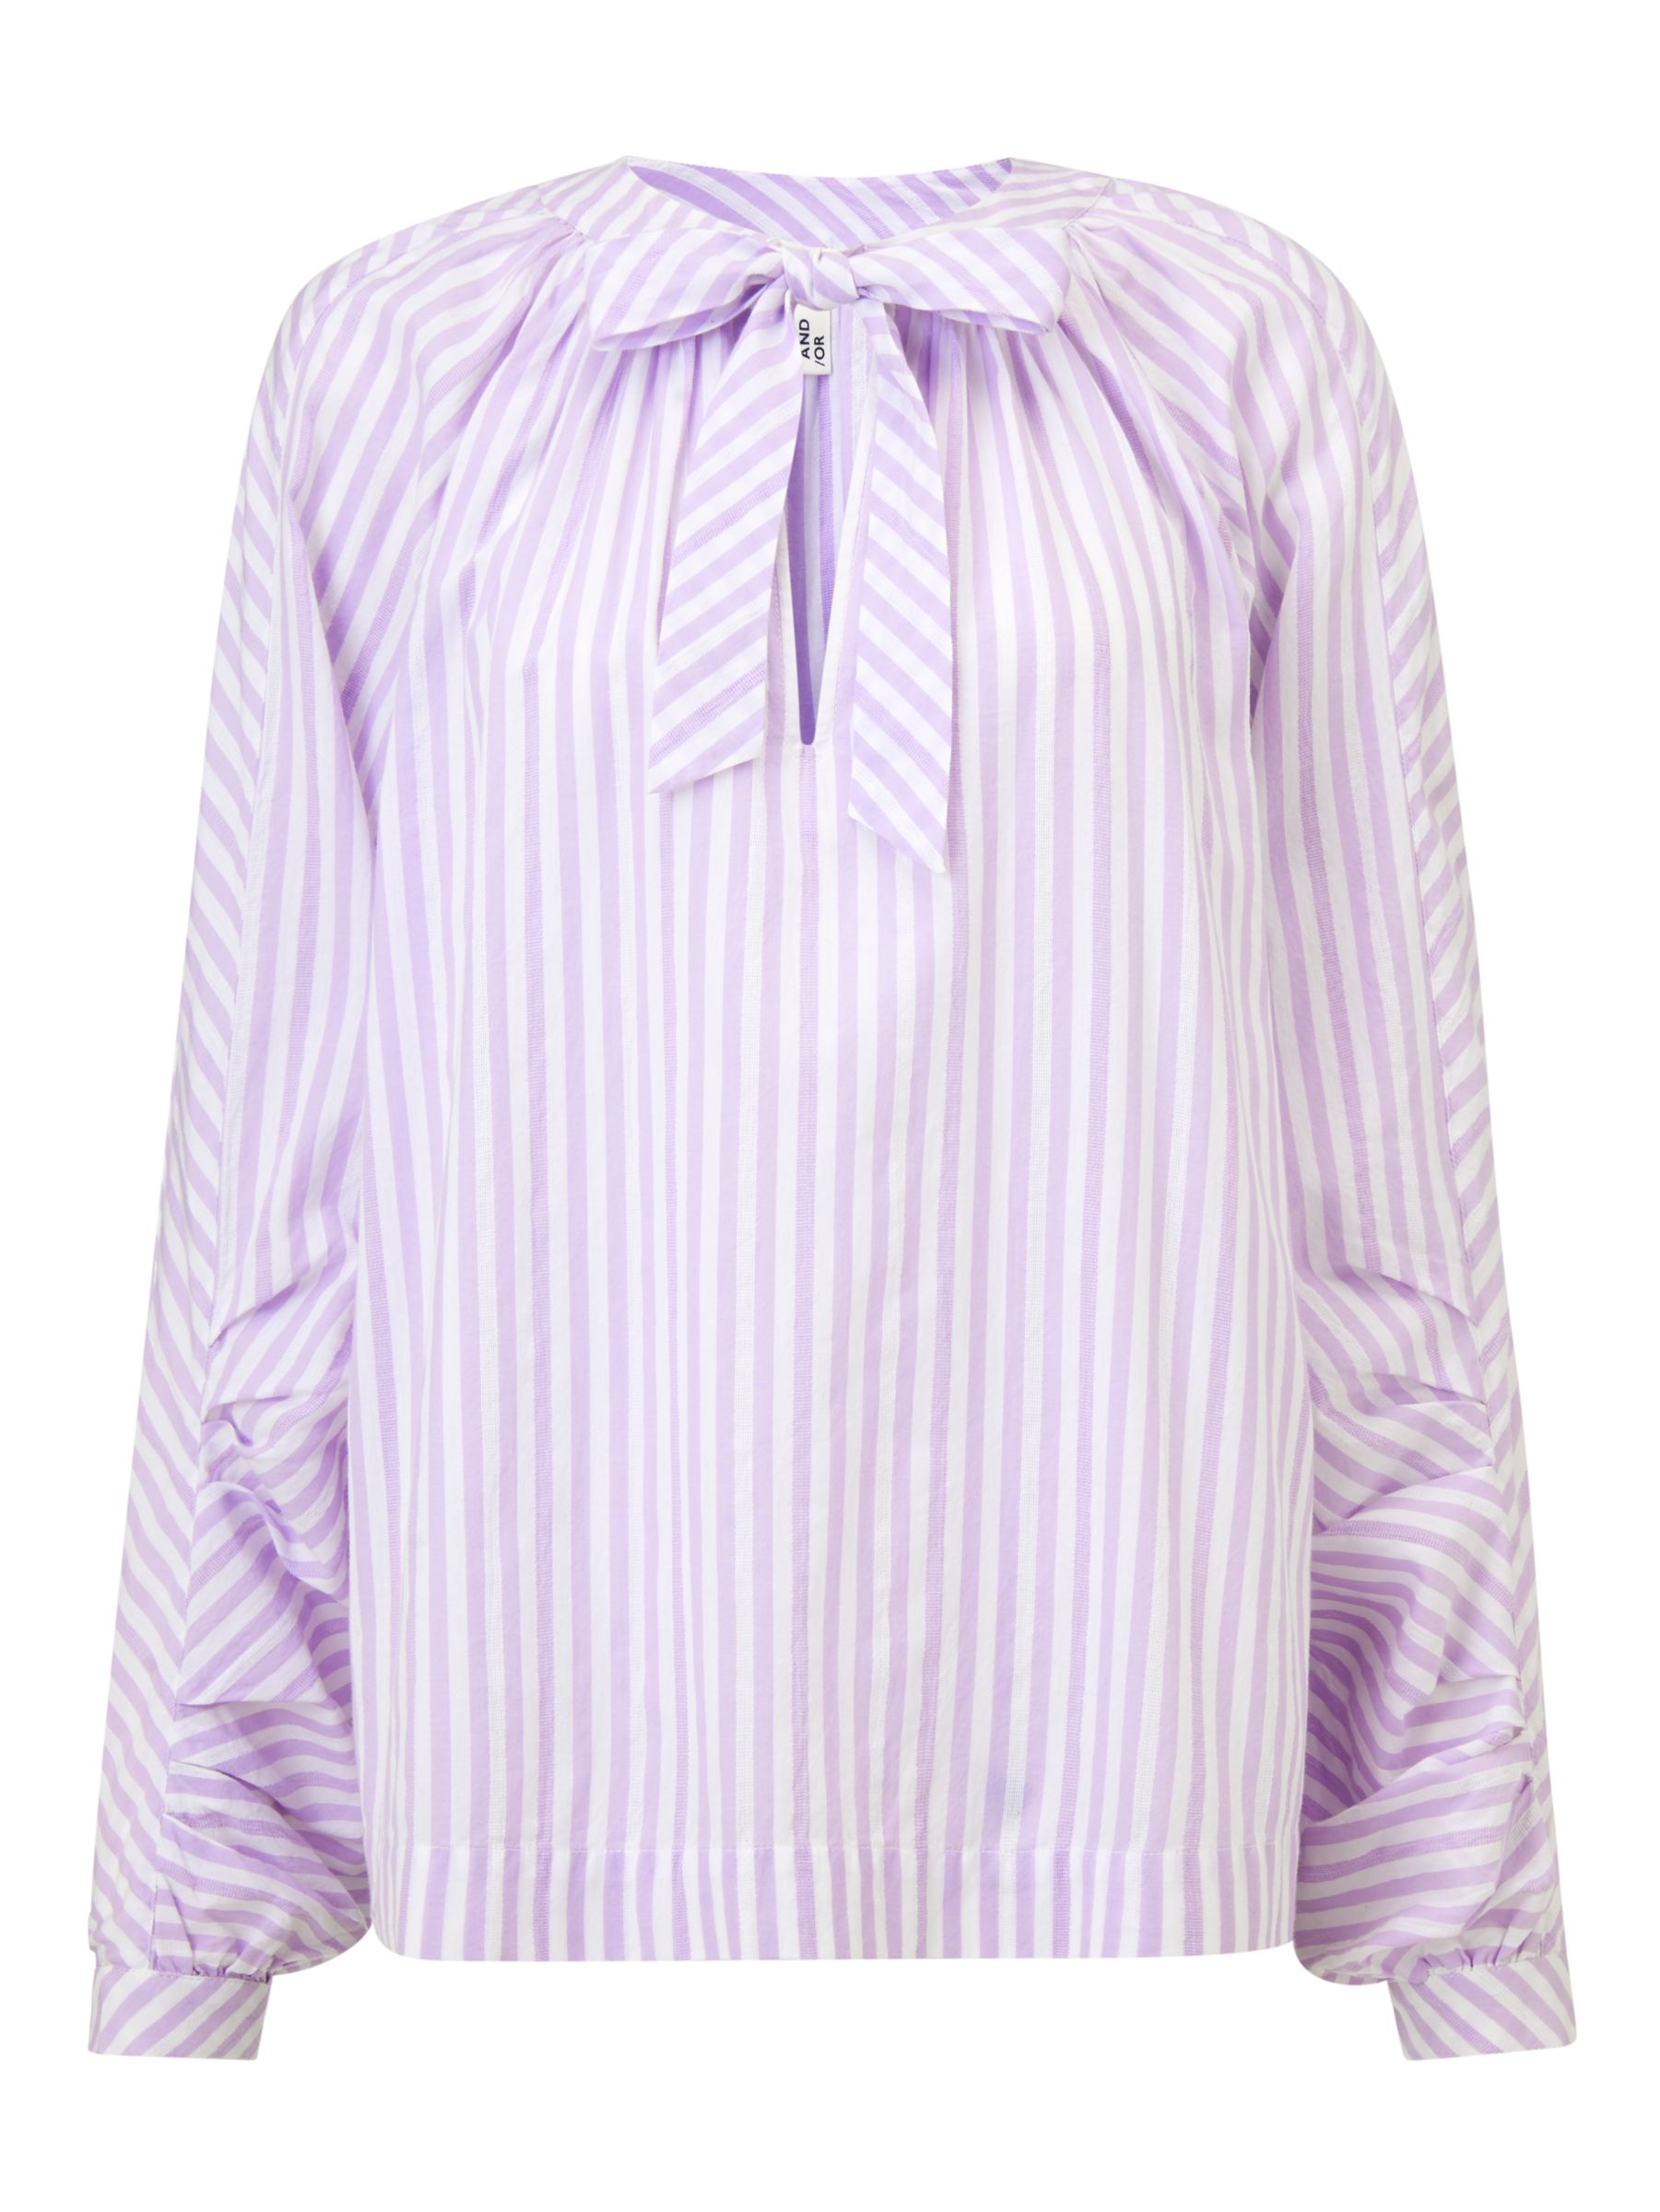 AND/OR Leila Cotton Top, Soft Lilac/Ivory